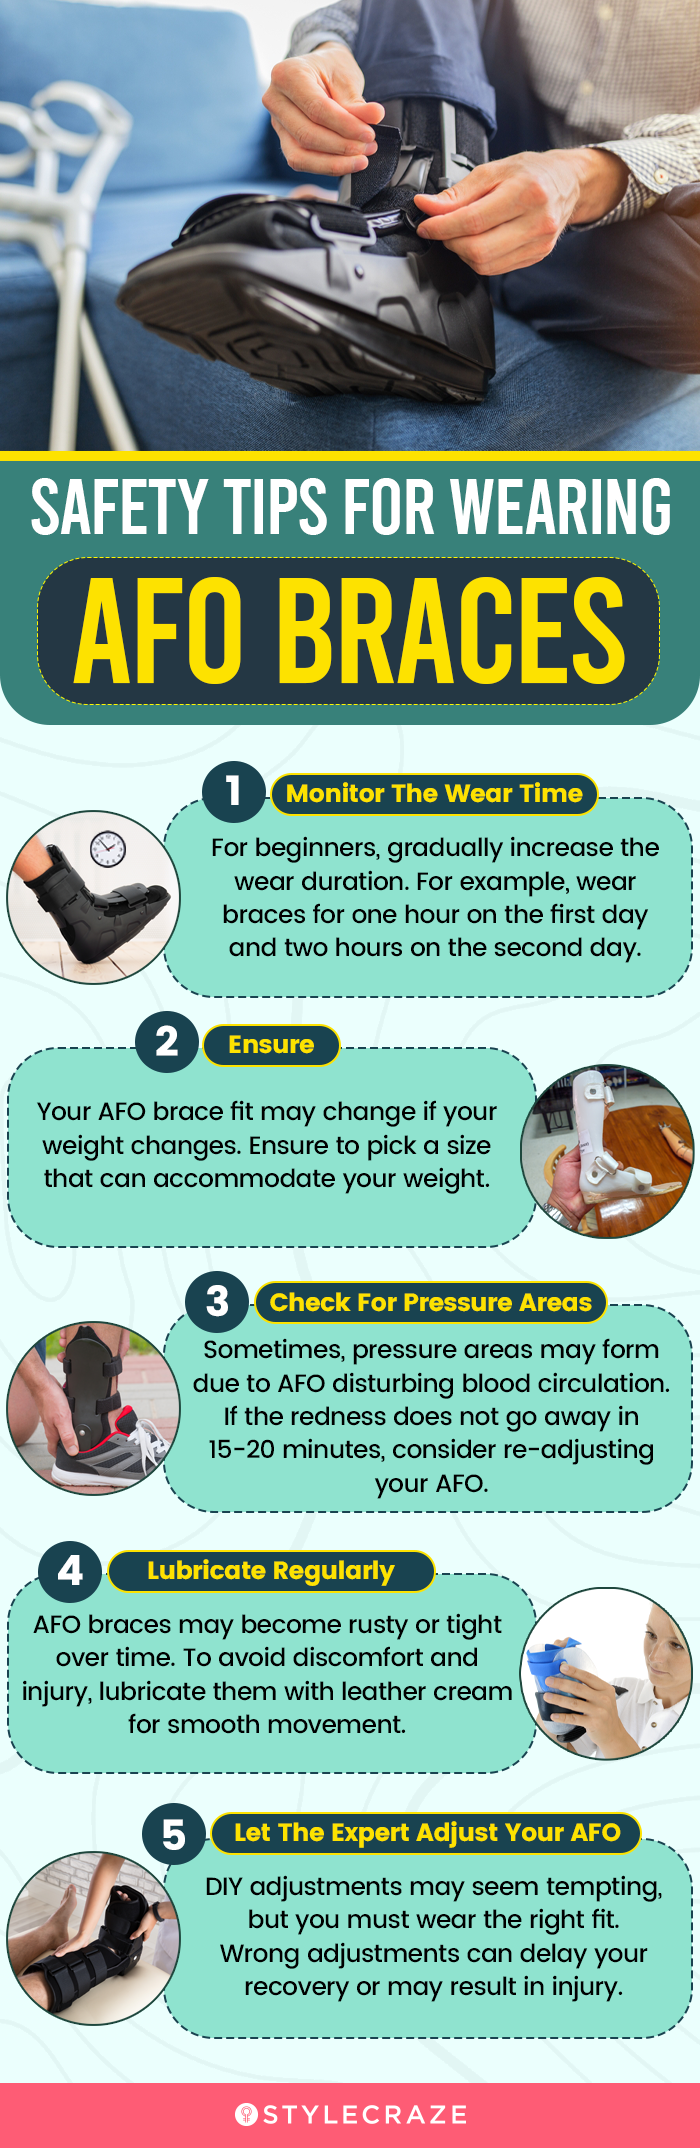 Safety Tips For Wearing AFO Braces (infographic)